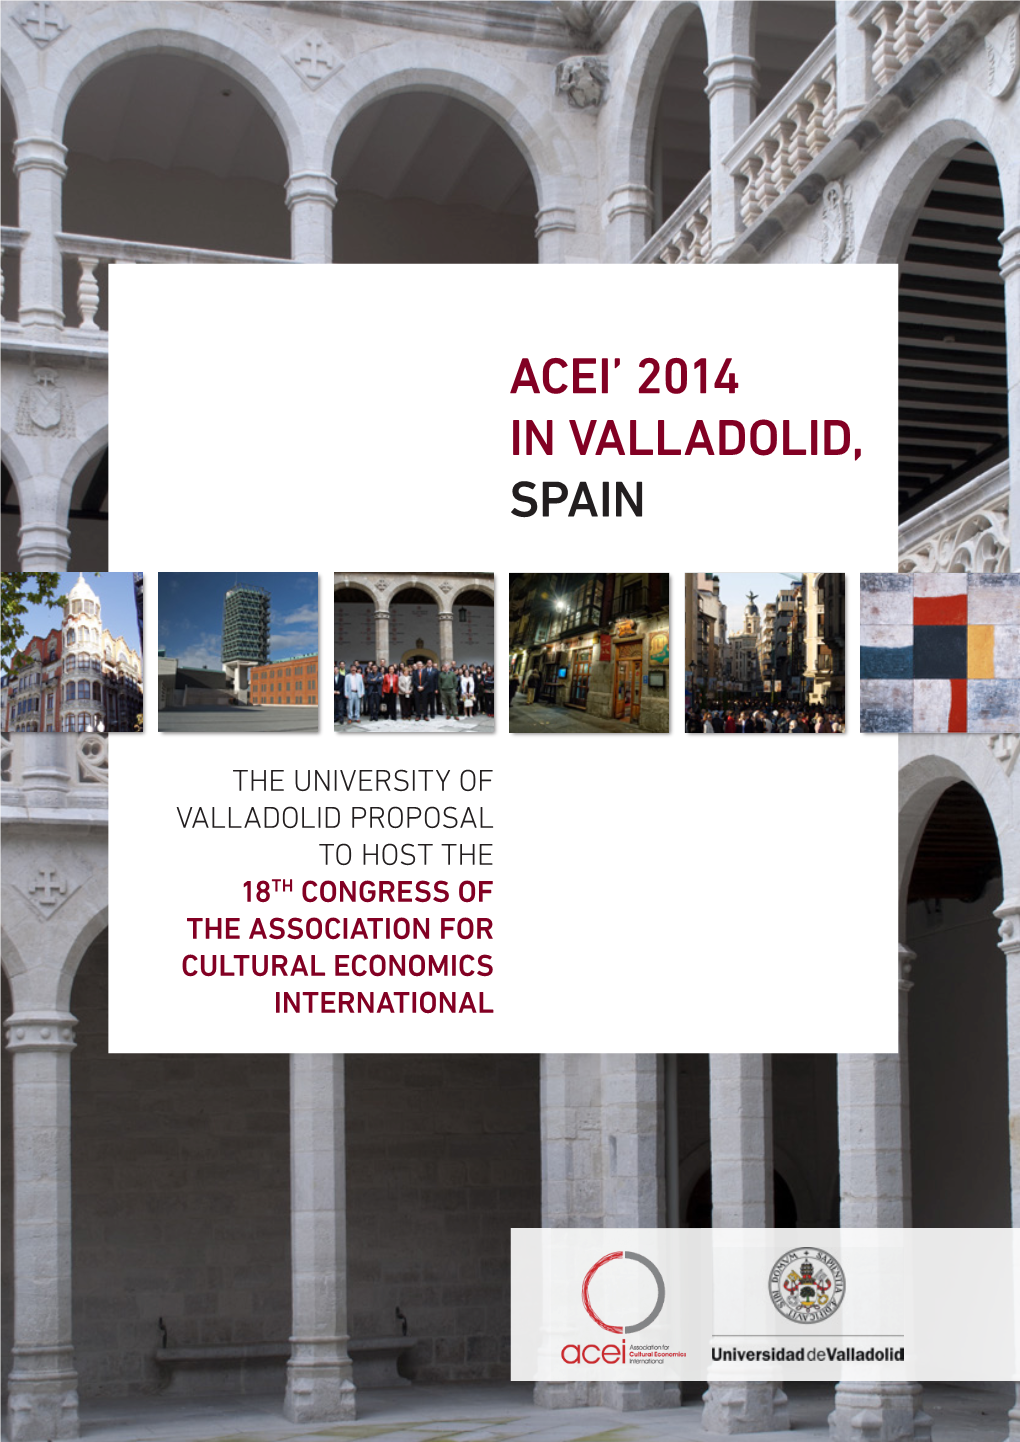 Acei' 2014 in Valladolid, Spain